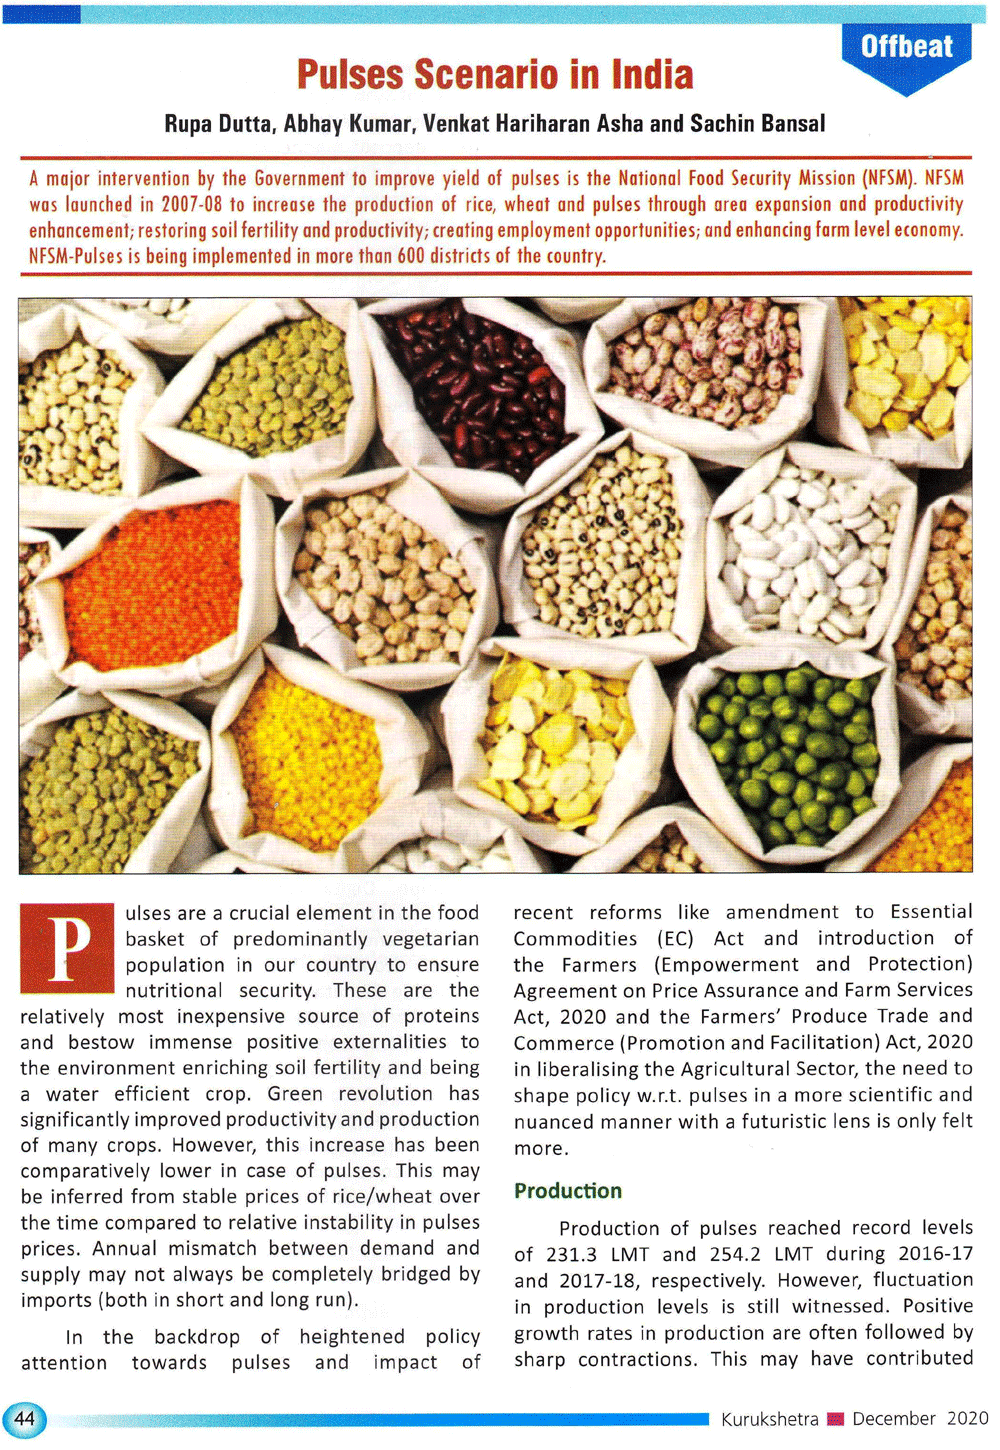 Pulses in India